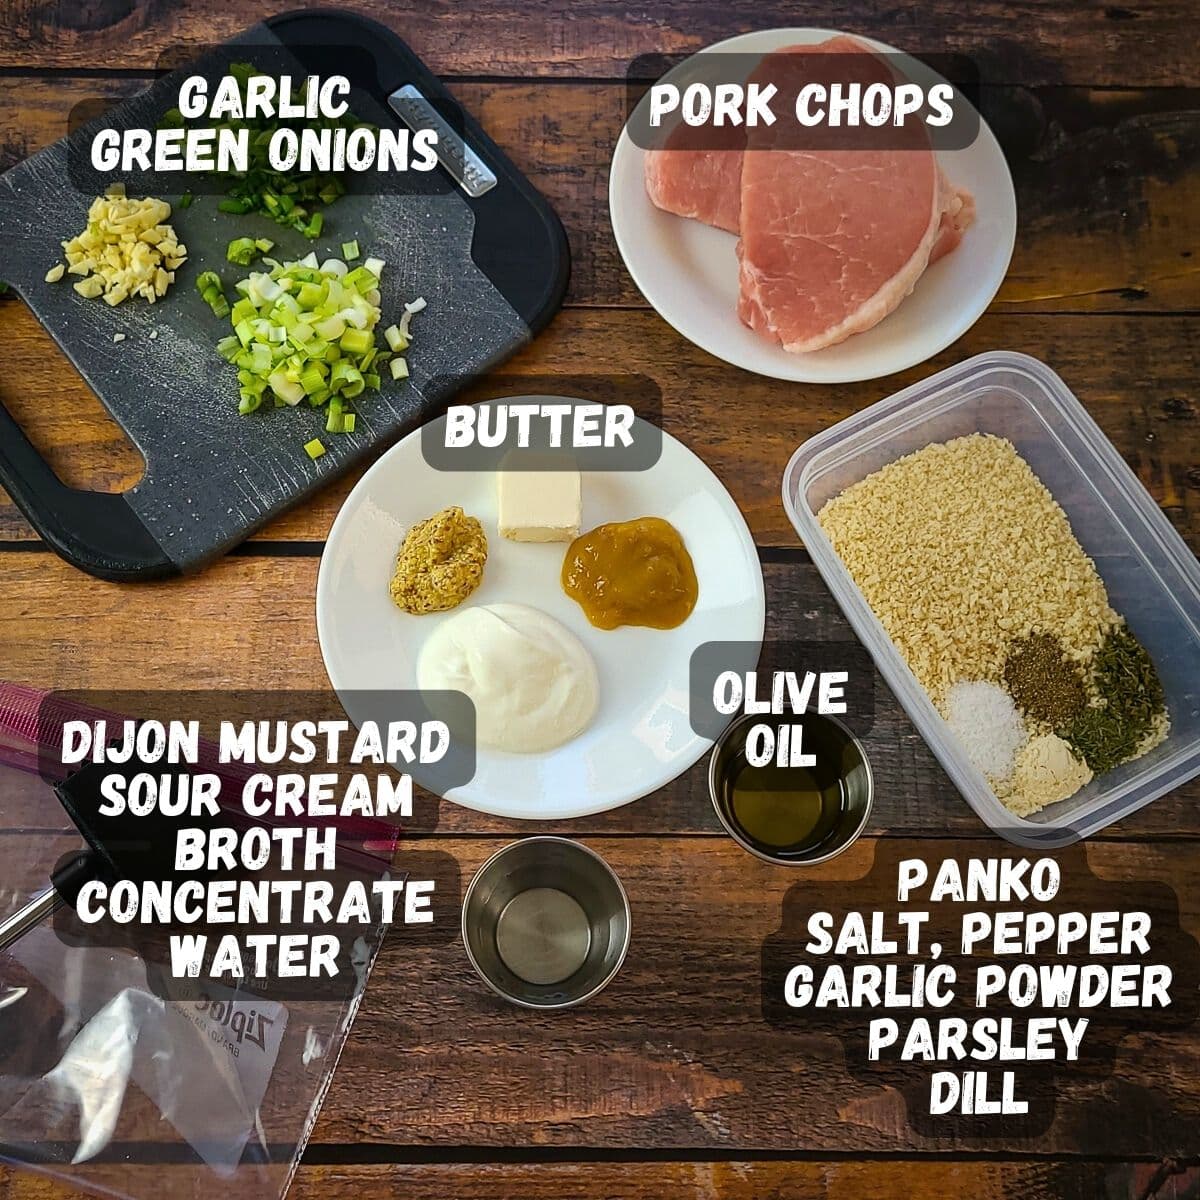 Ingredients laid out include chopped garlic and green onions, raw pork chops, butter, dijon mustard, sour cream, broth concentrate, water, olive oil, and panko with salt, pepper, garlic powder, parsley, and dill.